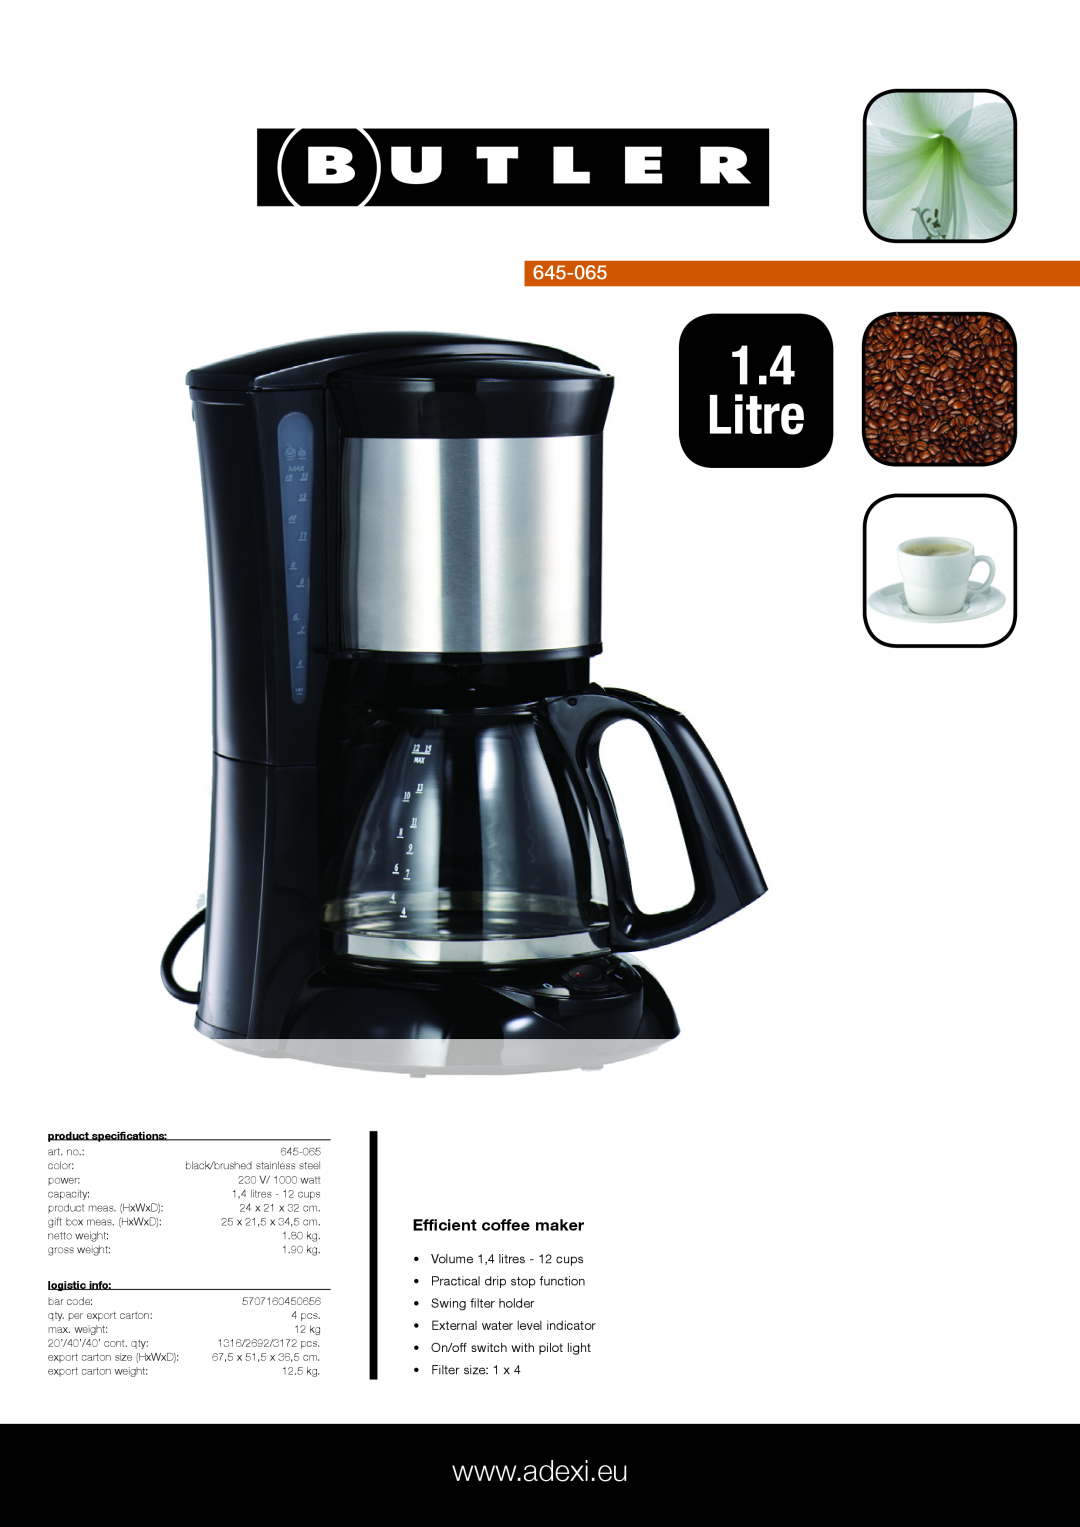 Melissa 645-065 specifications Litre, Efficient coffee maker, Volume 1,4 litres - 12 cups, Practical drip stop function 